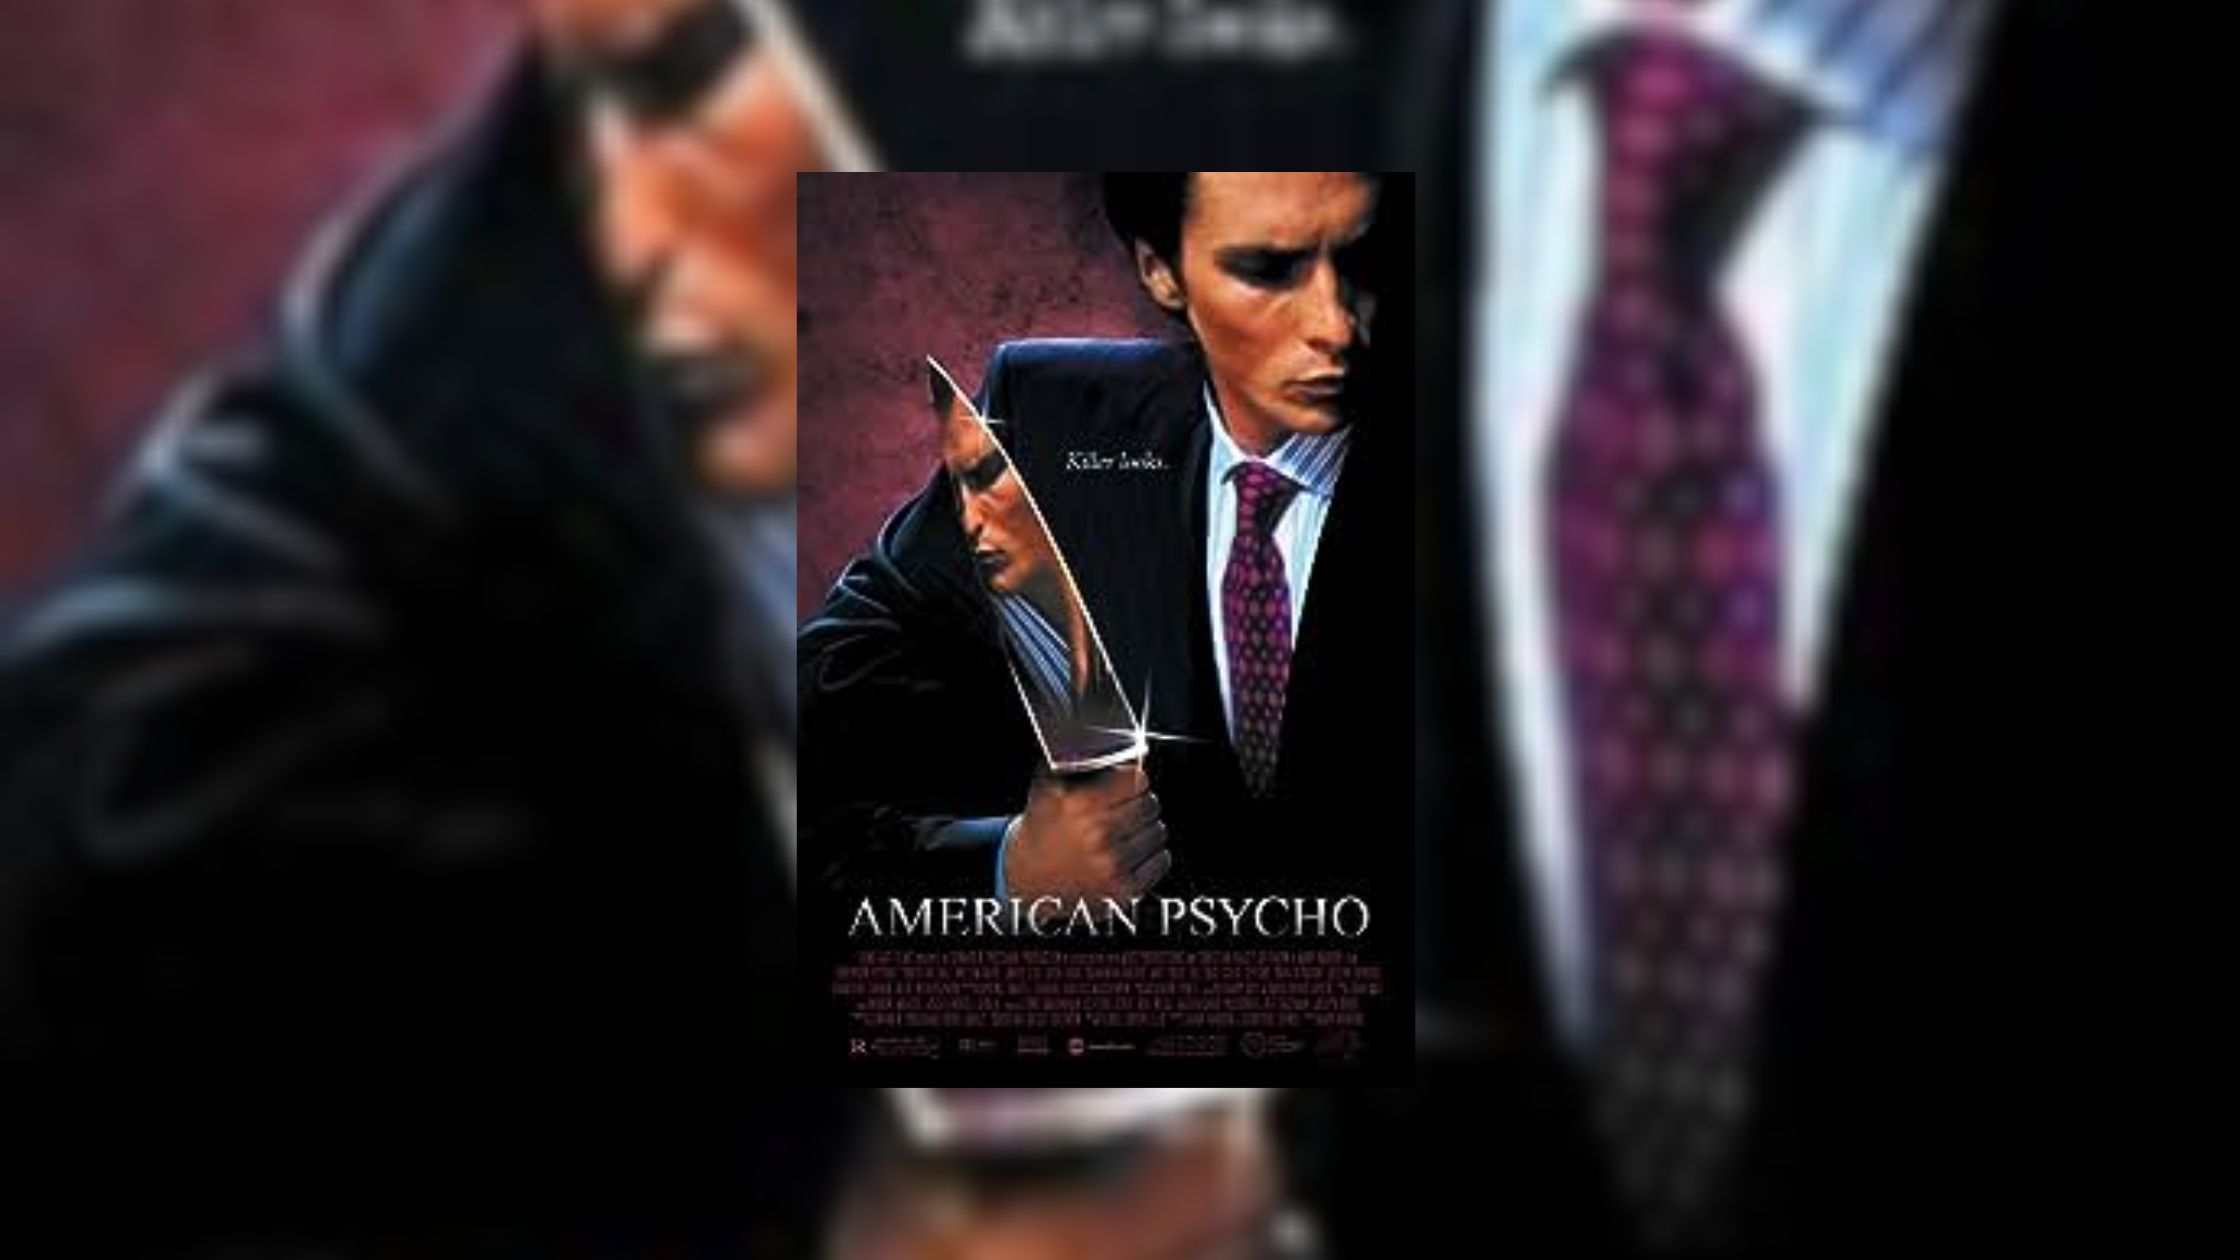 Poster of the film American Psycho released in 2000